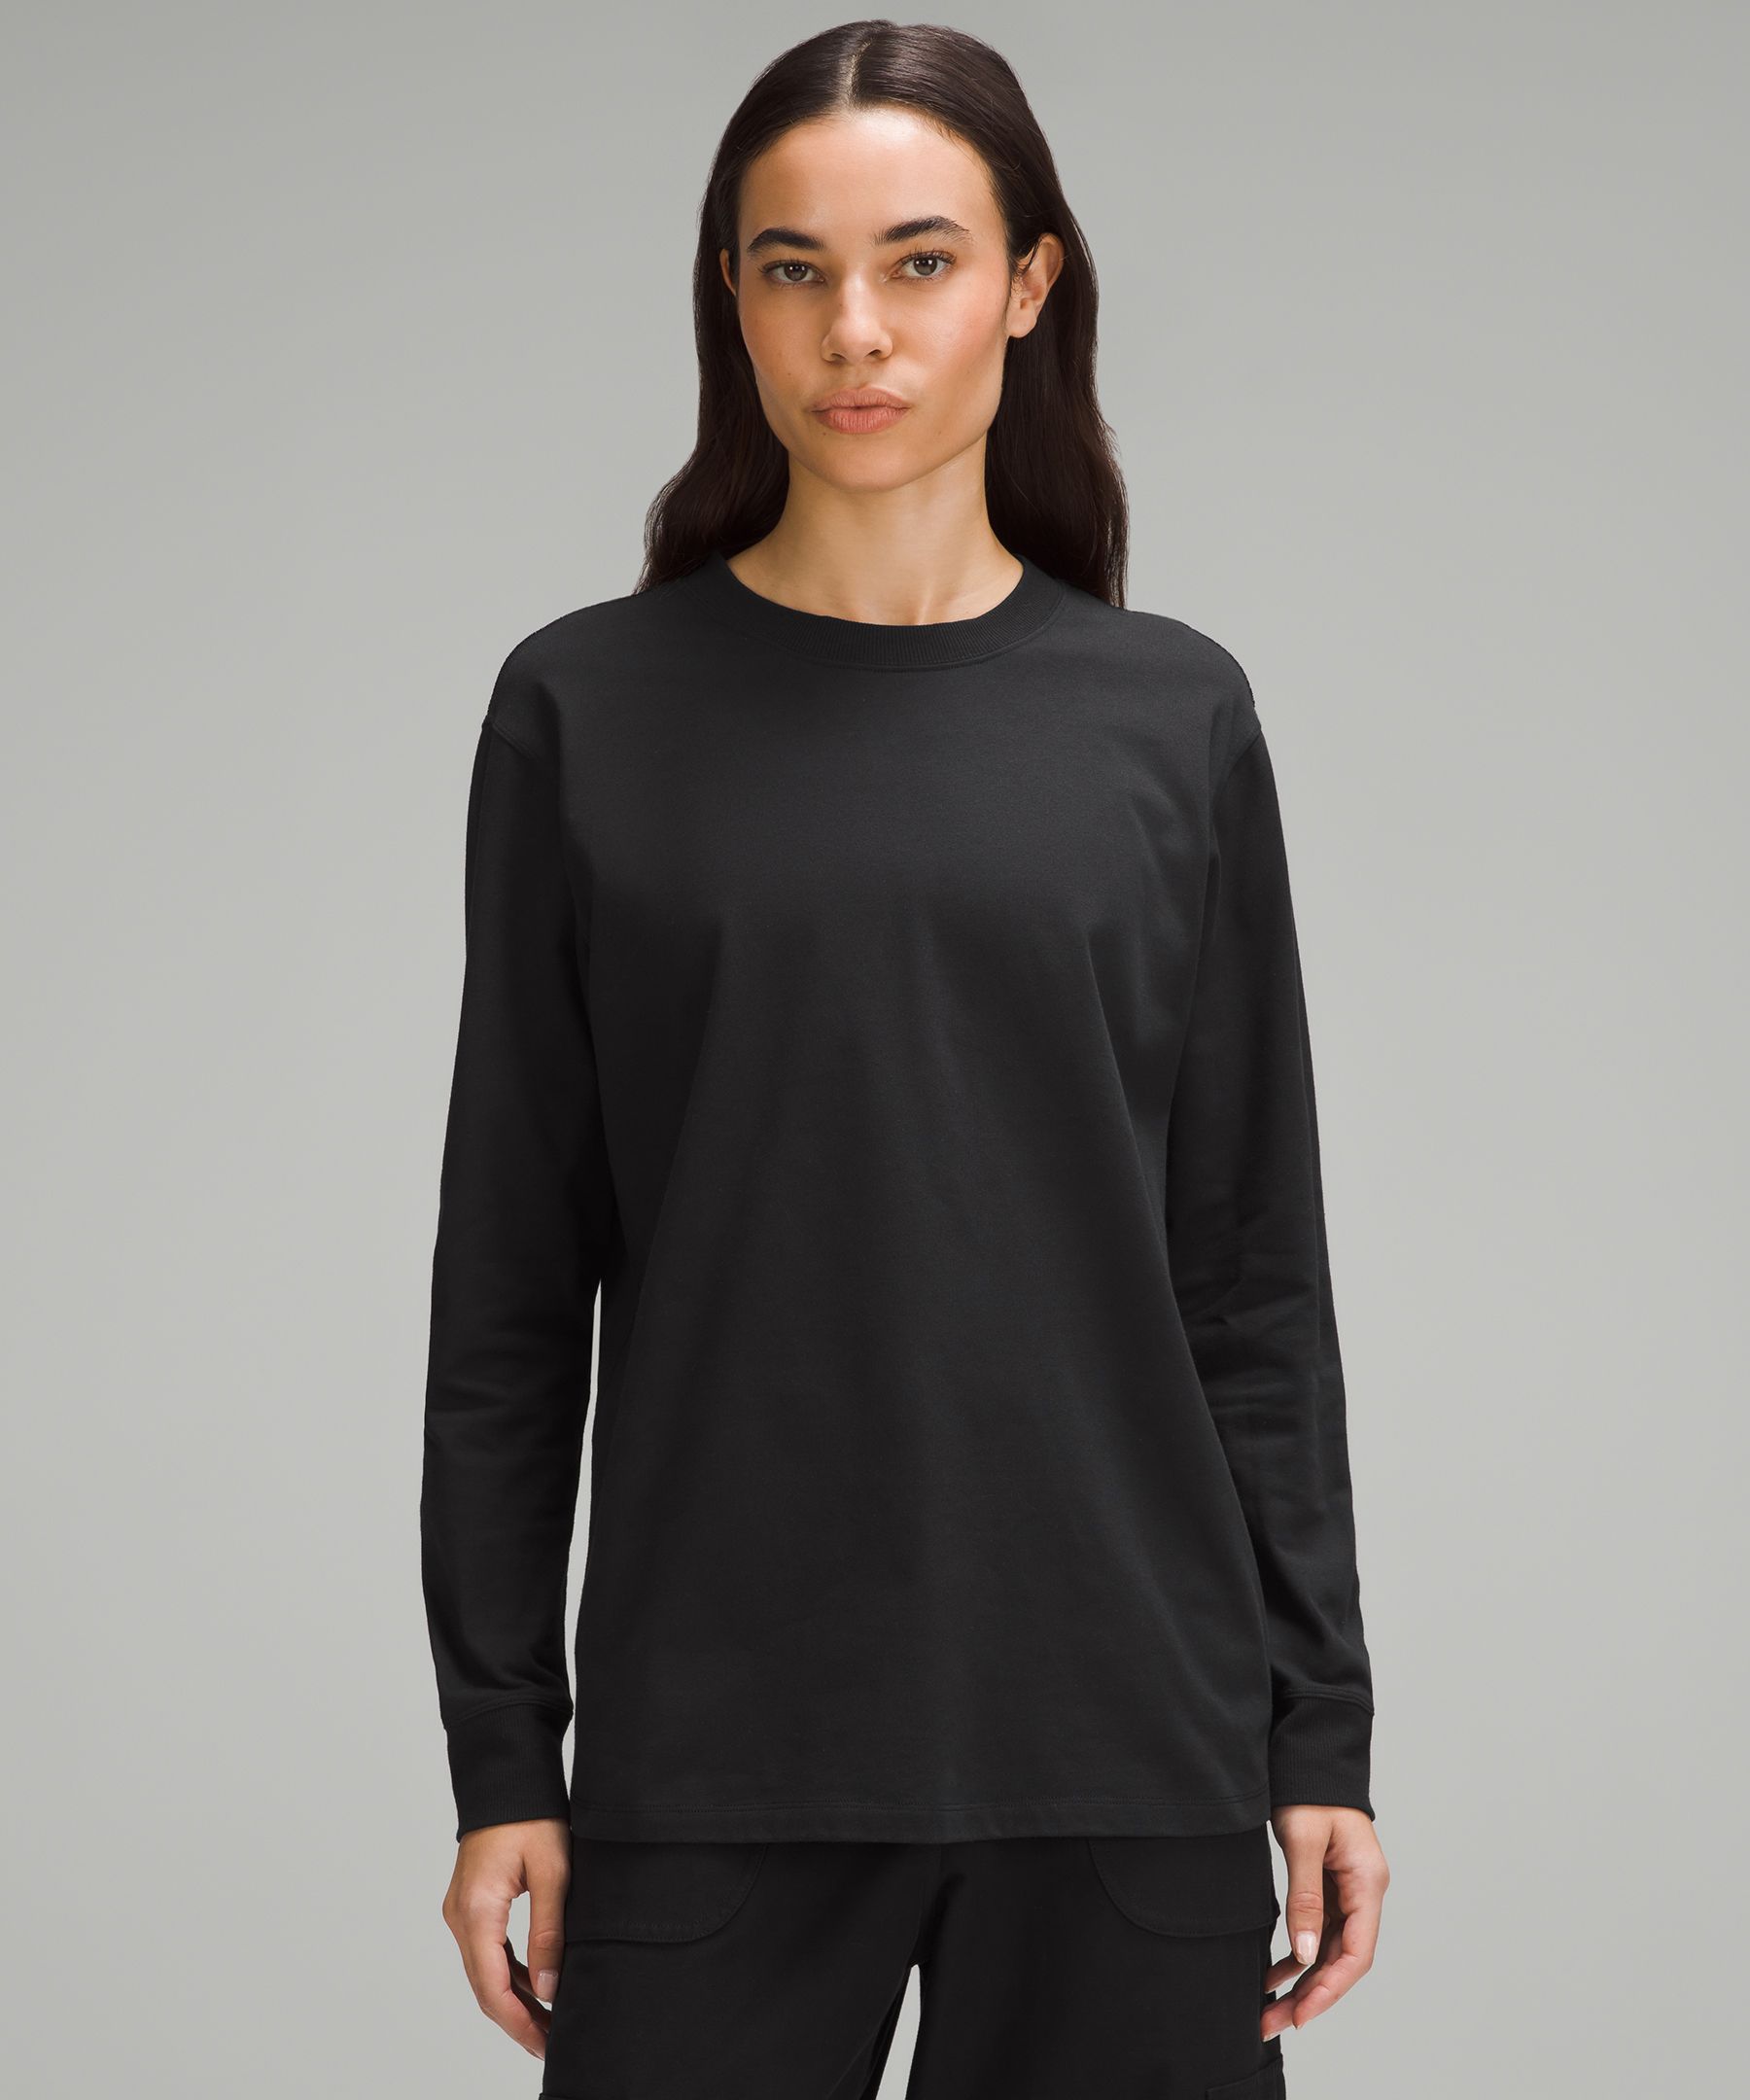 Lululemon Womens Black Long Sleeve Shirt Relaxed fit Size 6 Pit-18